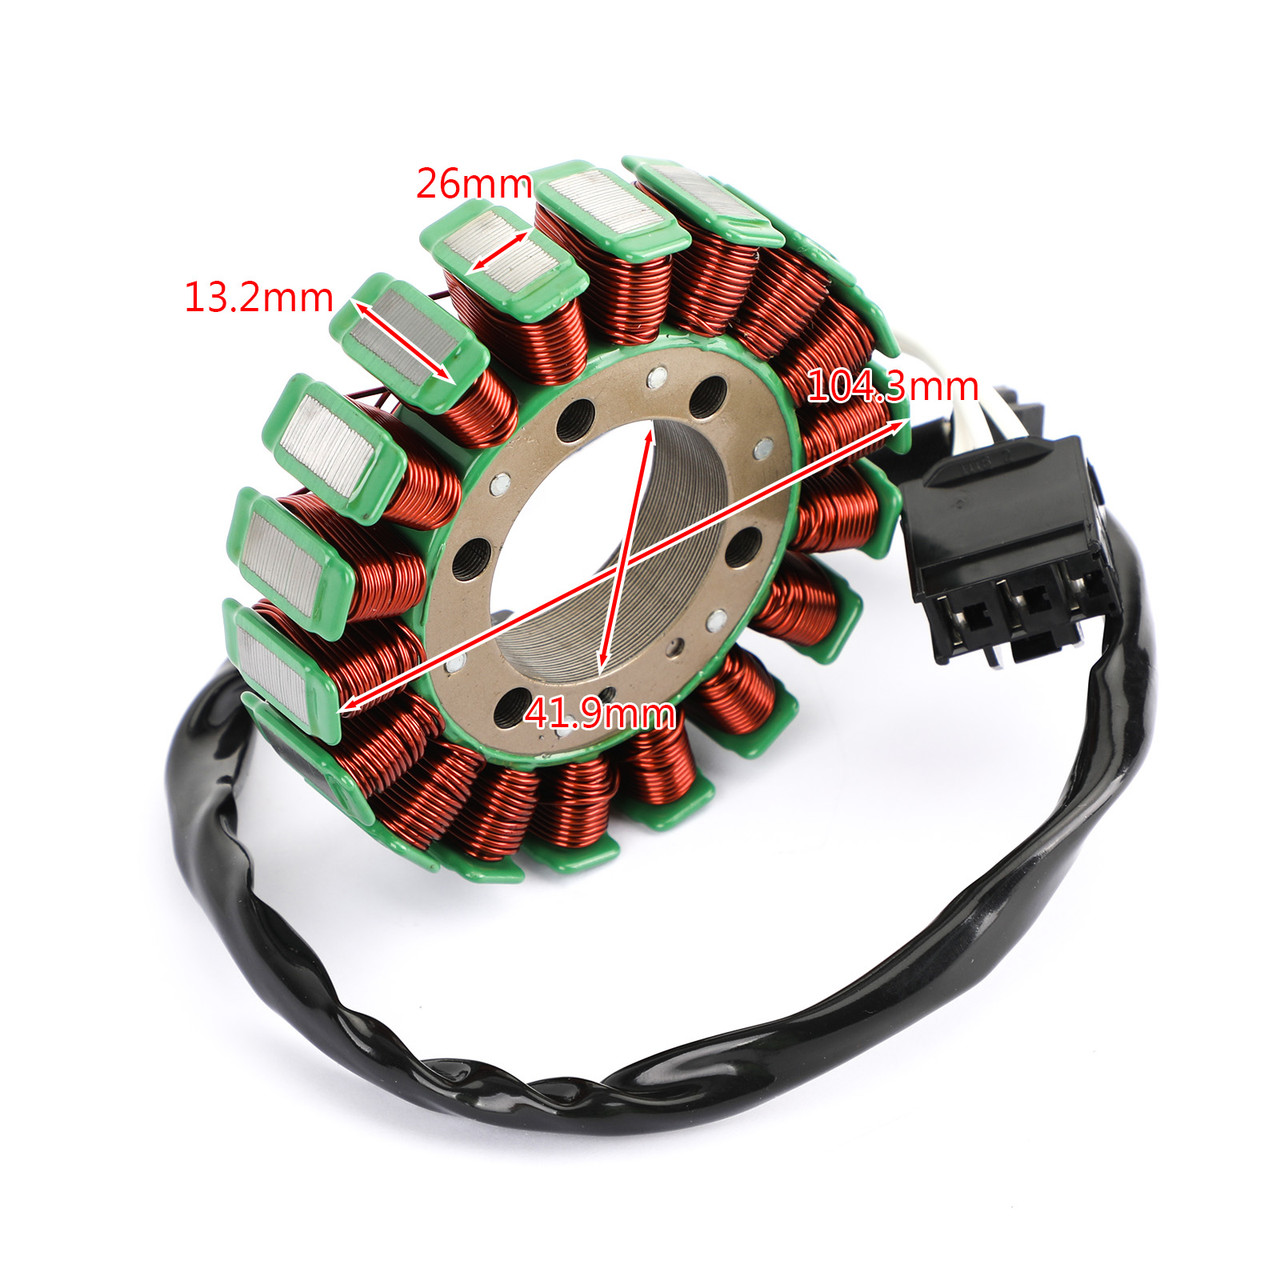 Stator Generator Fits For Kawasaki Z900 ABS 2017-2020 Versys 1000 2012-2014